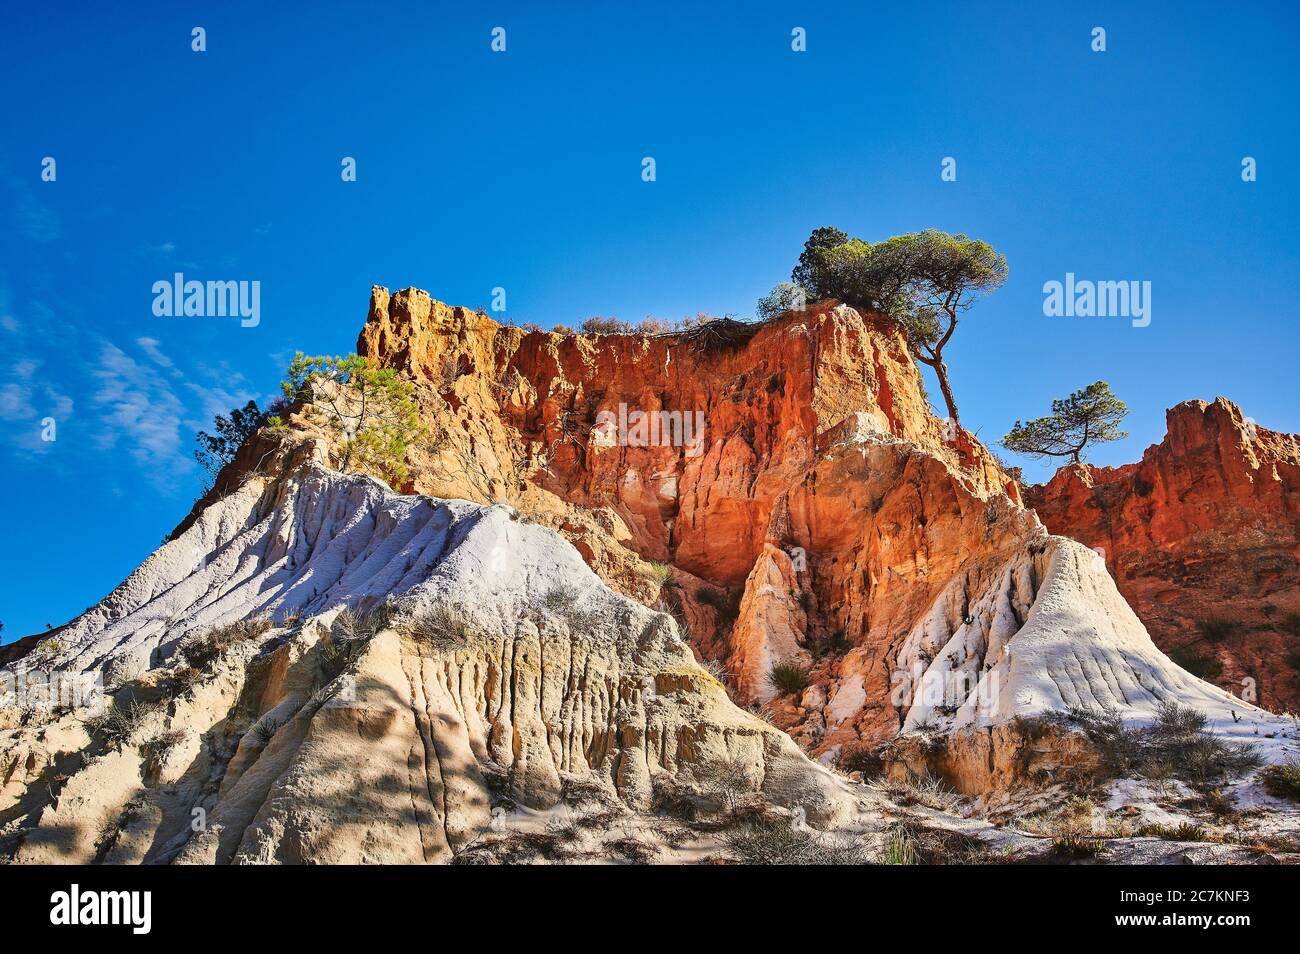 Europe, Portugal, Algarve, Litoral, Barlavento, district of Faro, between Vilamoura and Albufeira, Olhos de Agua, massif of colored layers of rock Stock Photo